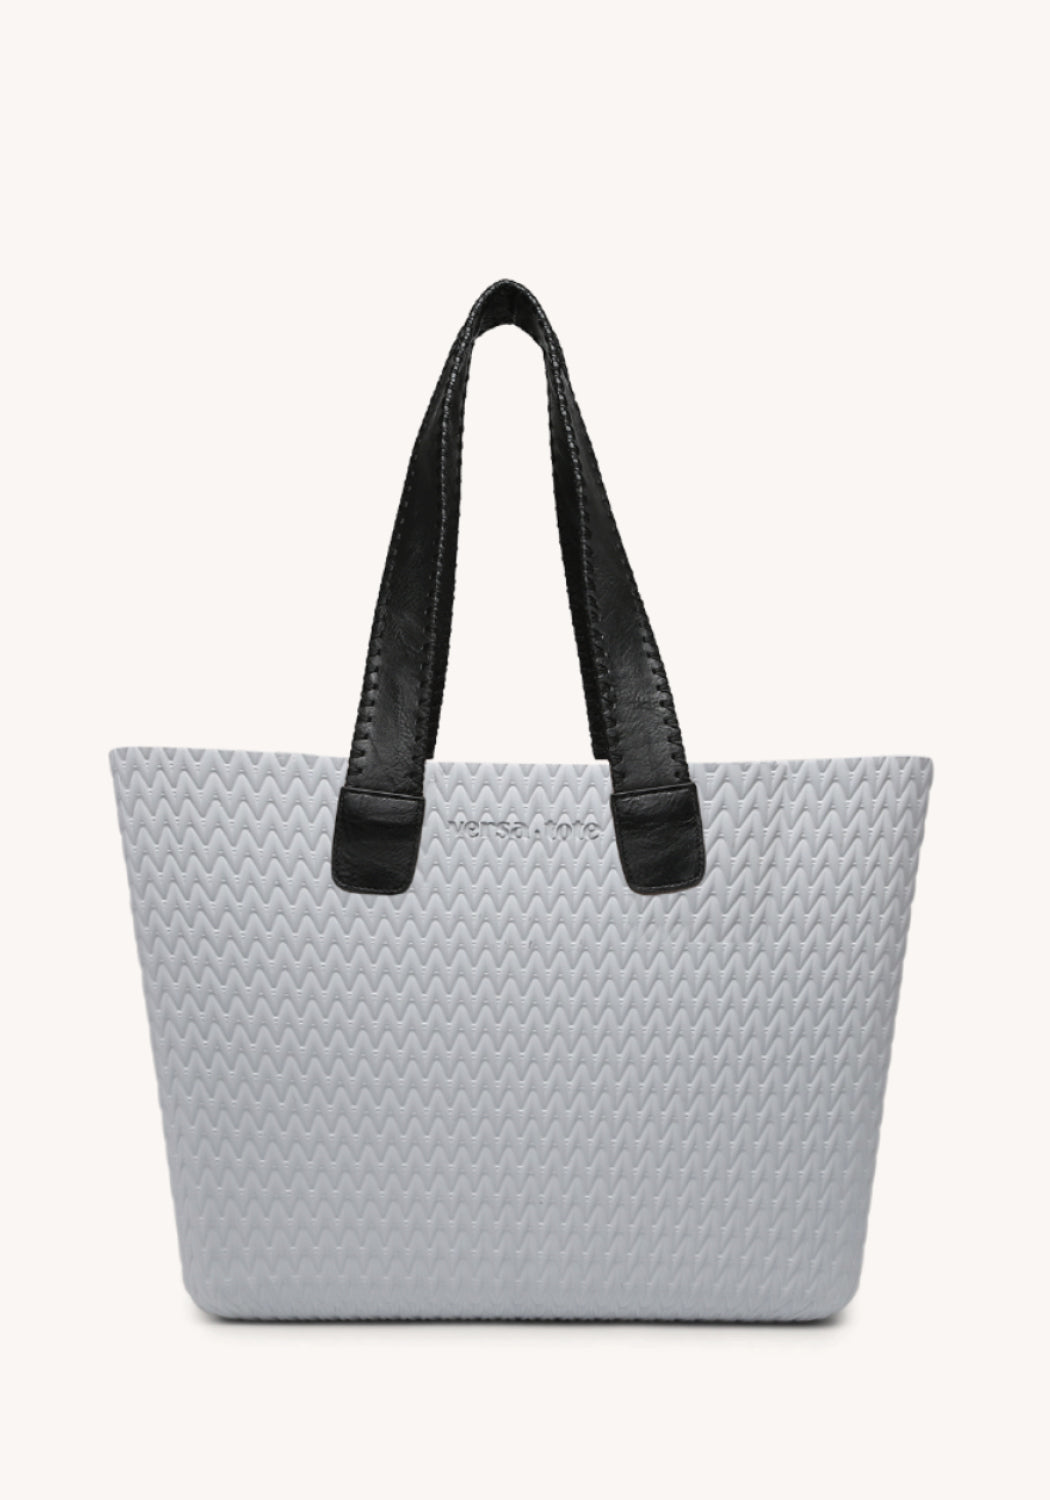 The 'Lisa' Everyday Textured Tote